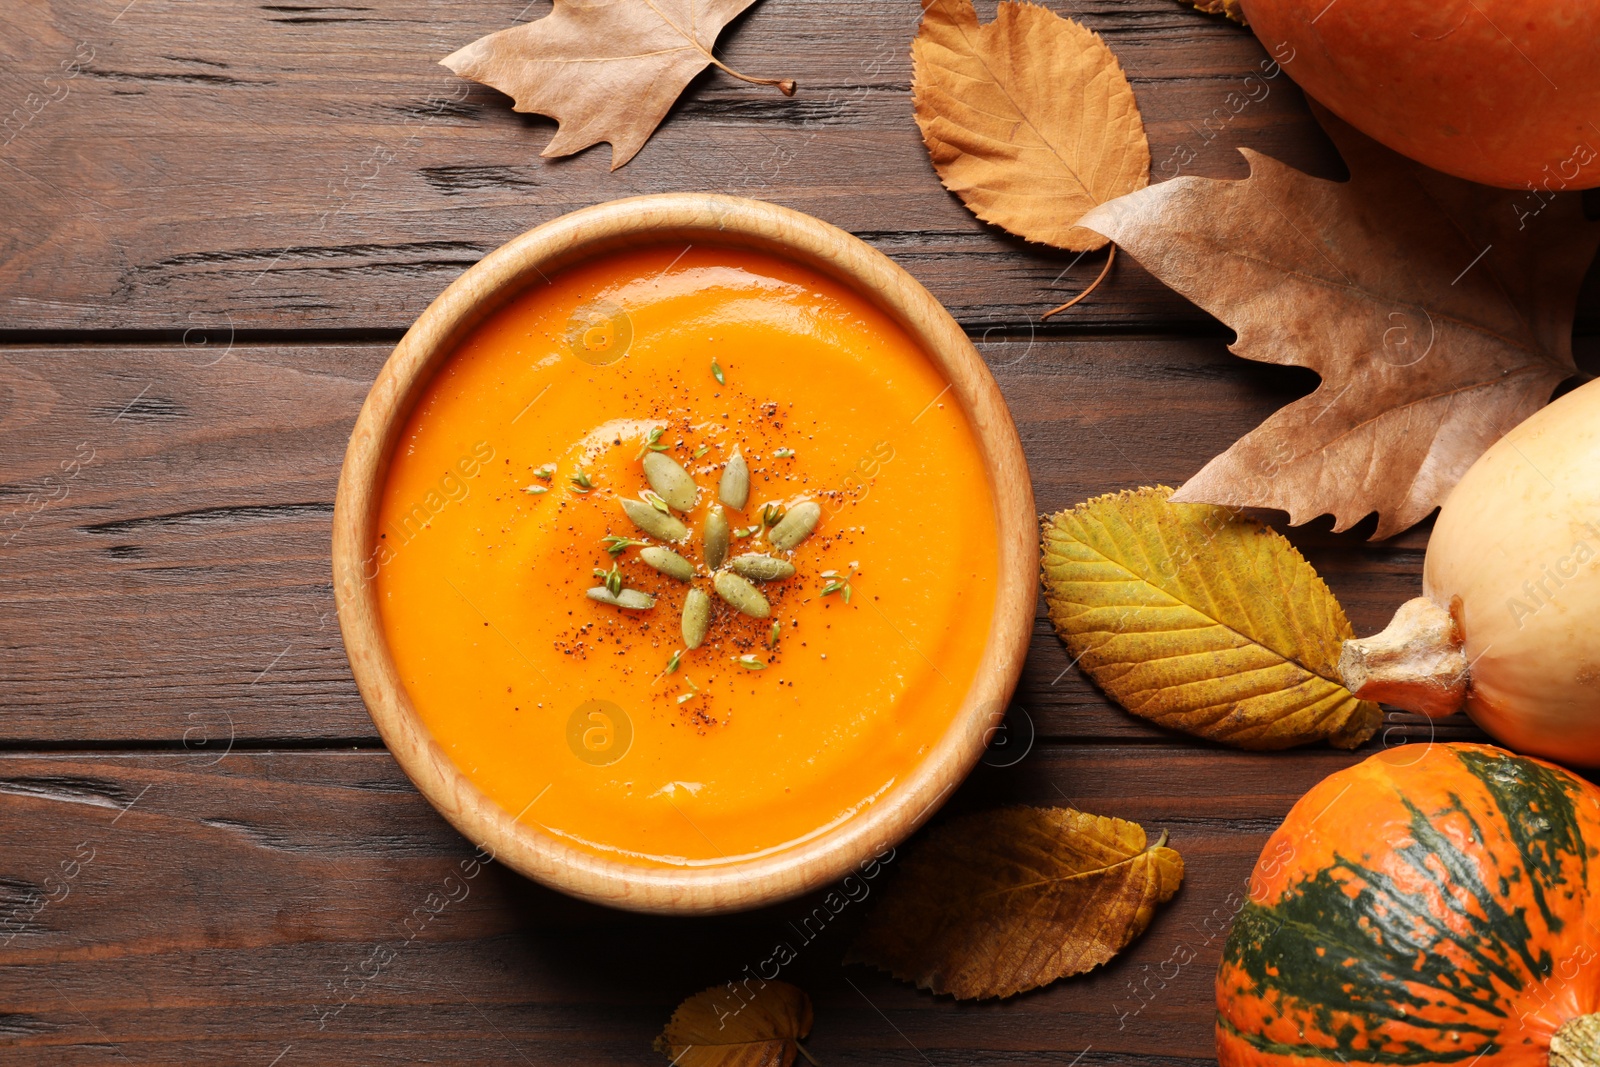 Photo of Flat lay composition with bowl of pumpkin soup on wooden background